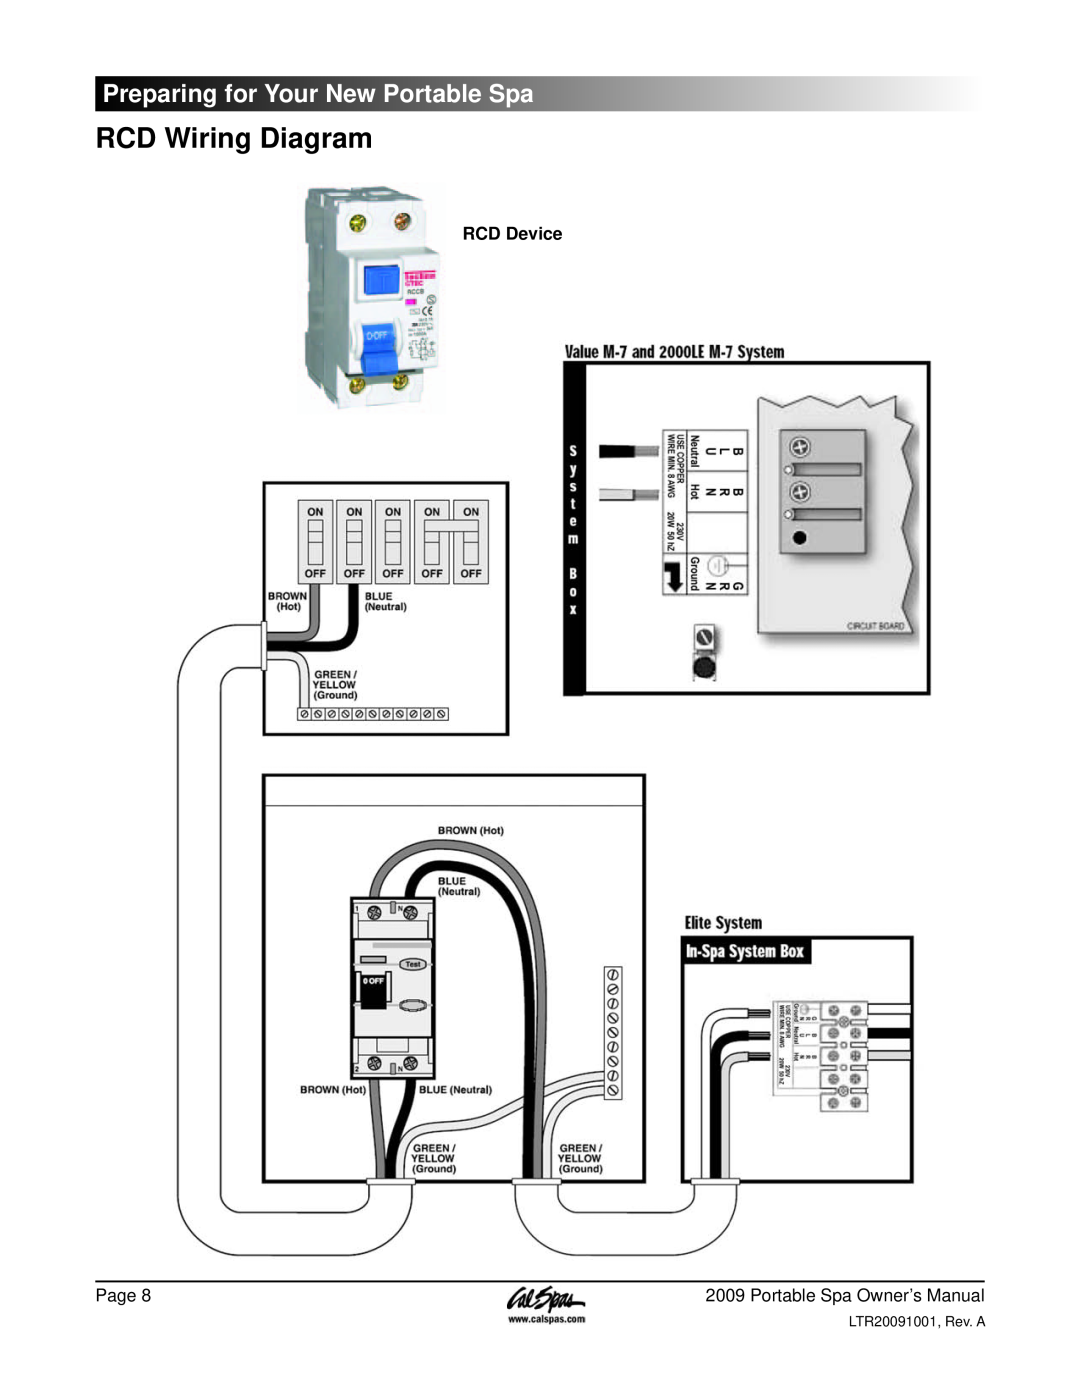 Cal Spas Portable Spas manual RCD Wiring Diagram, RCD Device, Preparing for Your New Portable Spa 